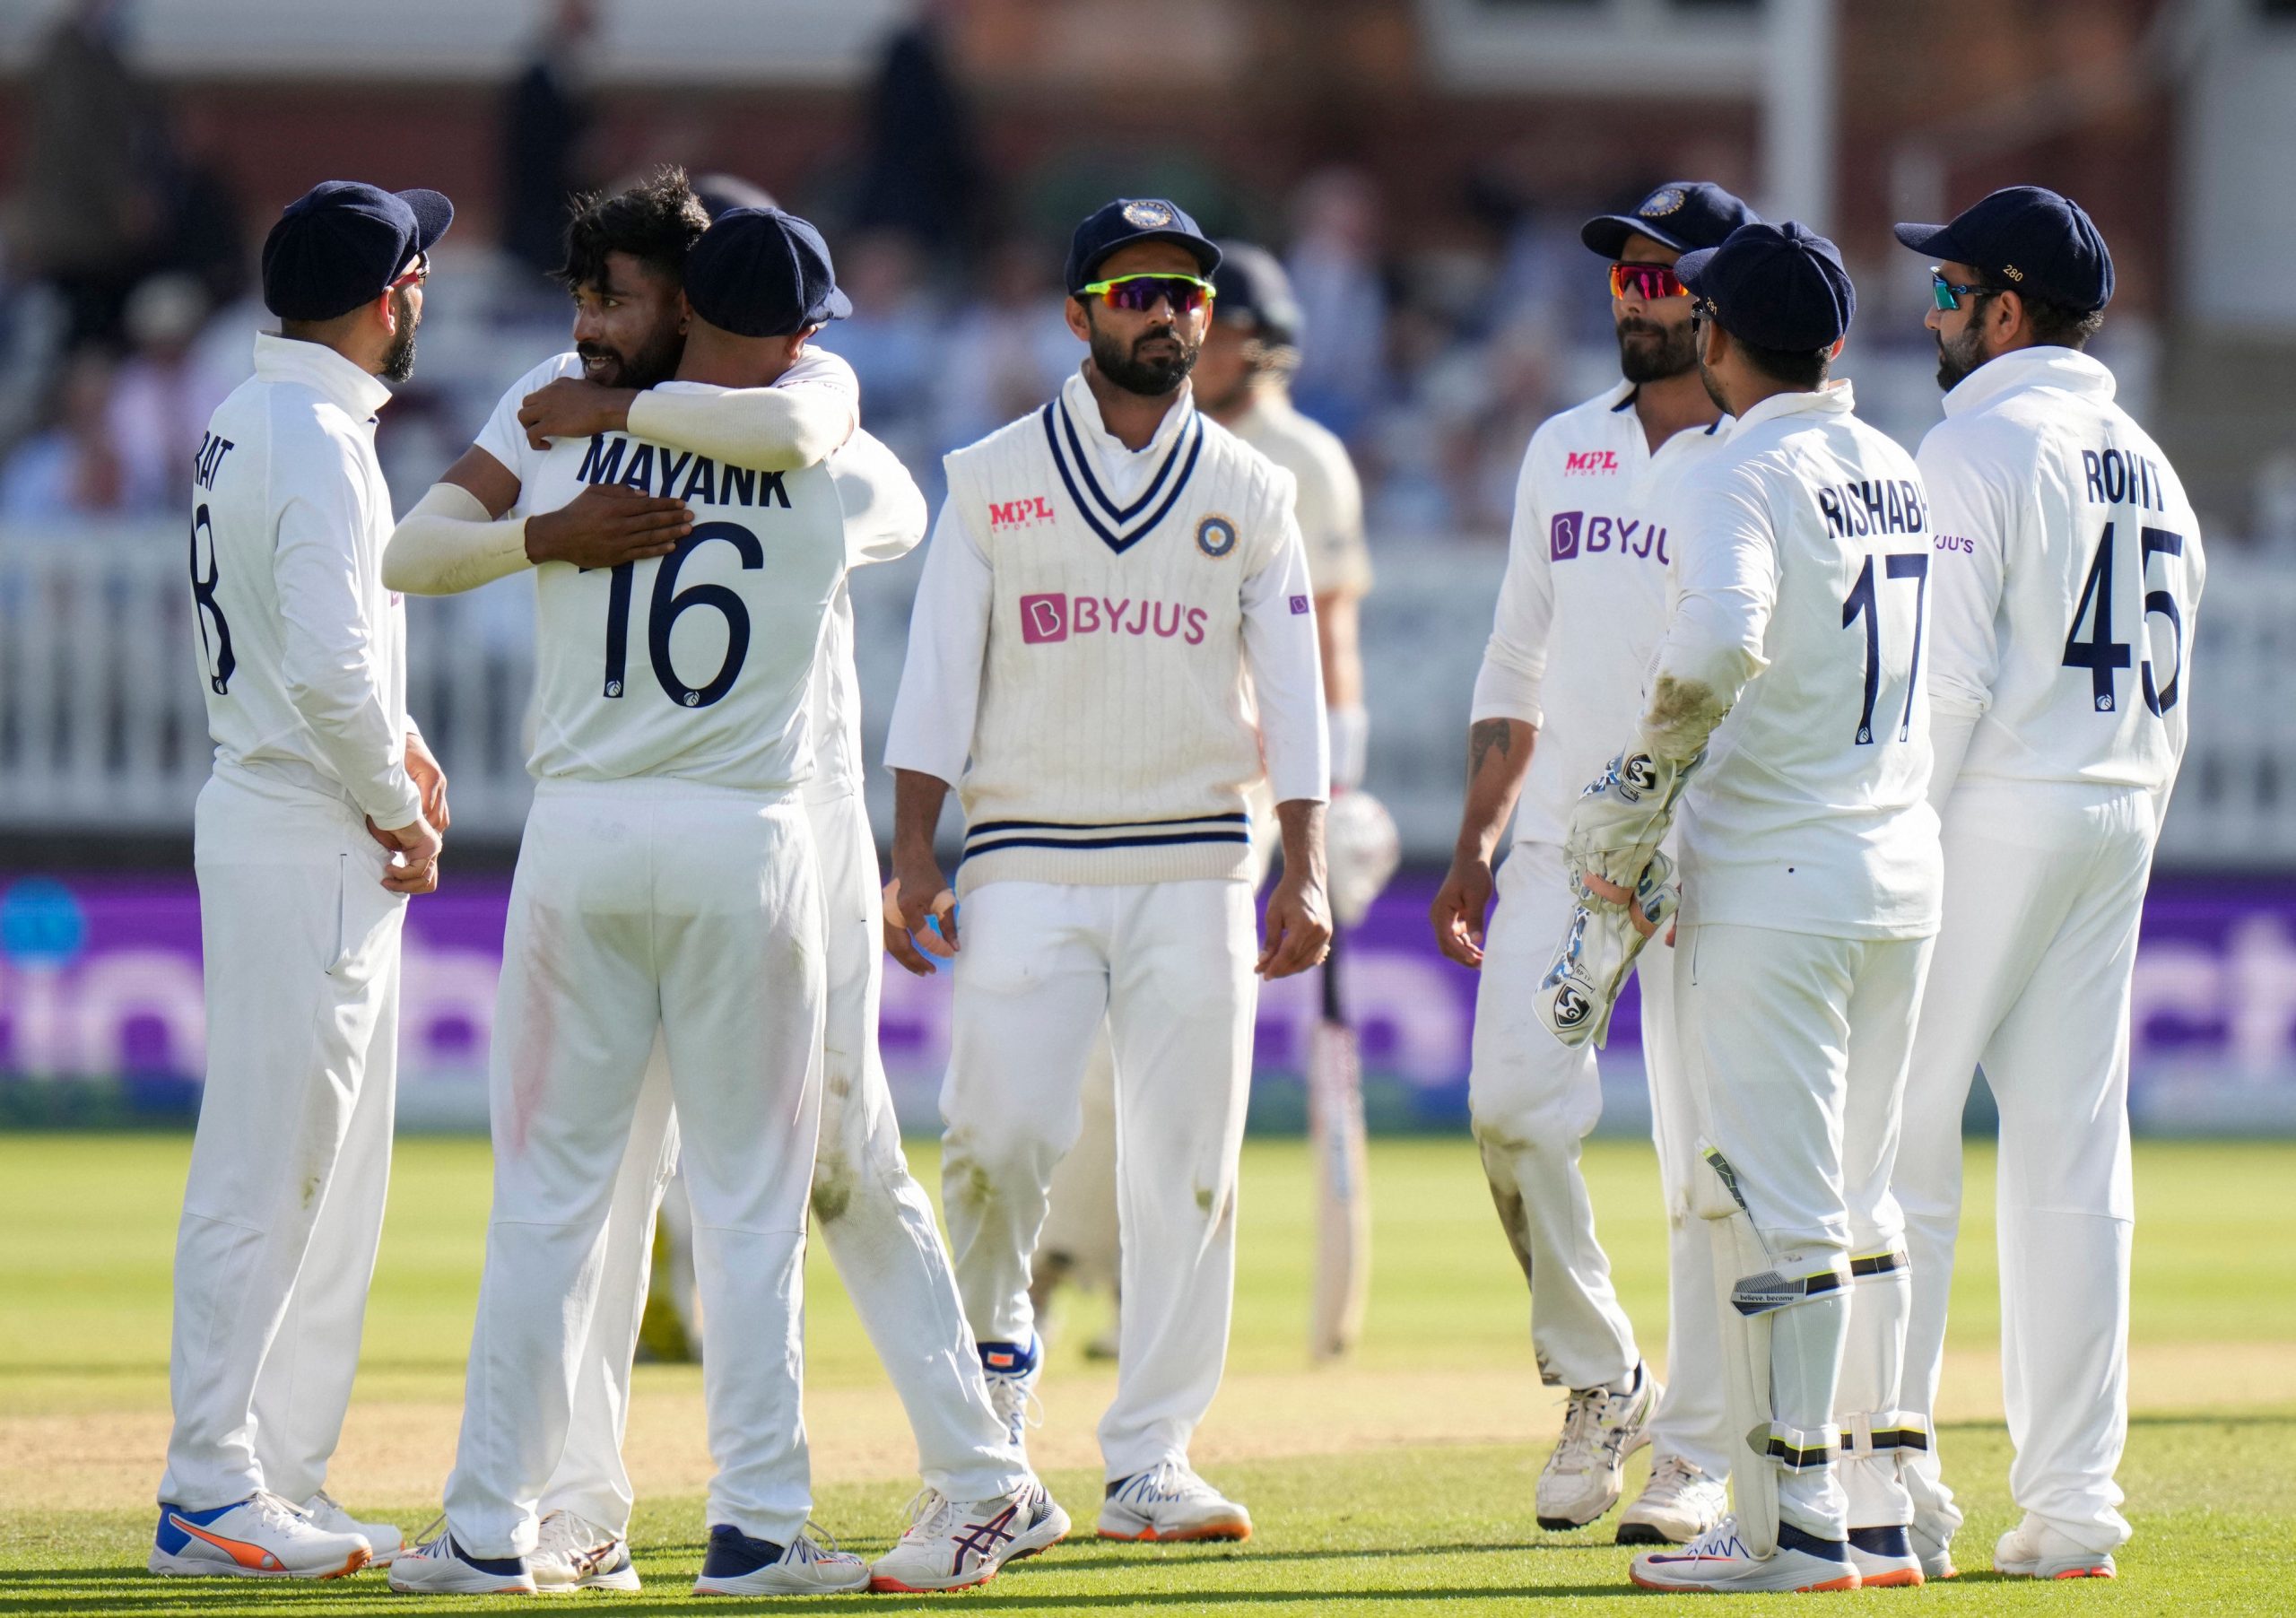 2nd Test: India beat England by 151 runs, take 1-0 lead in 5-match series